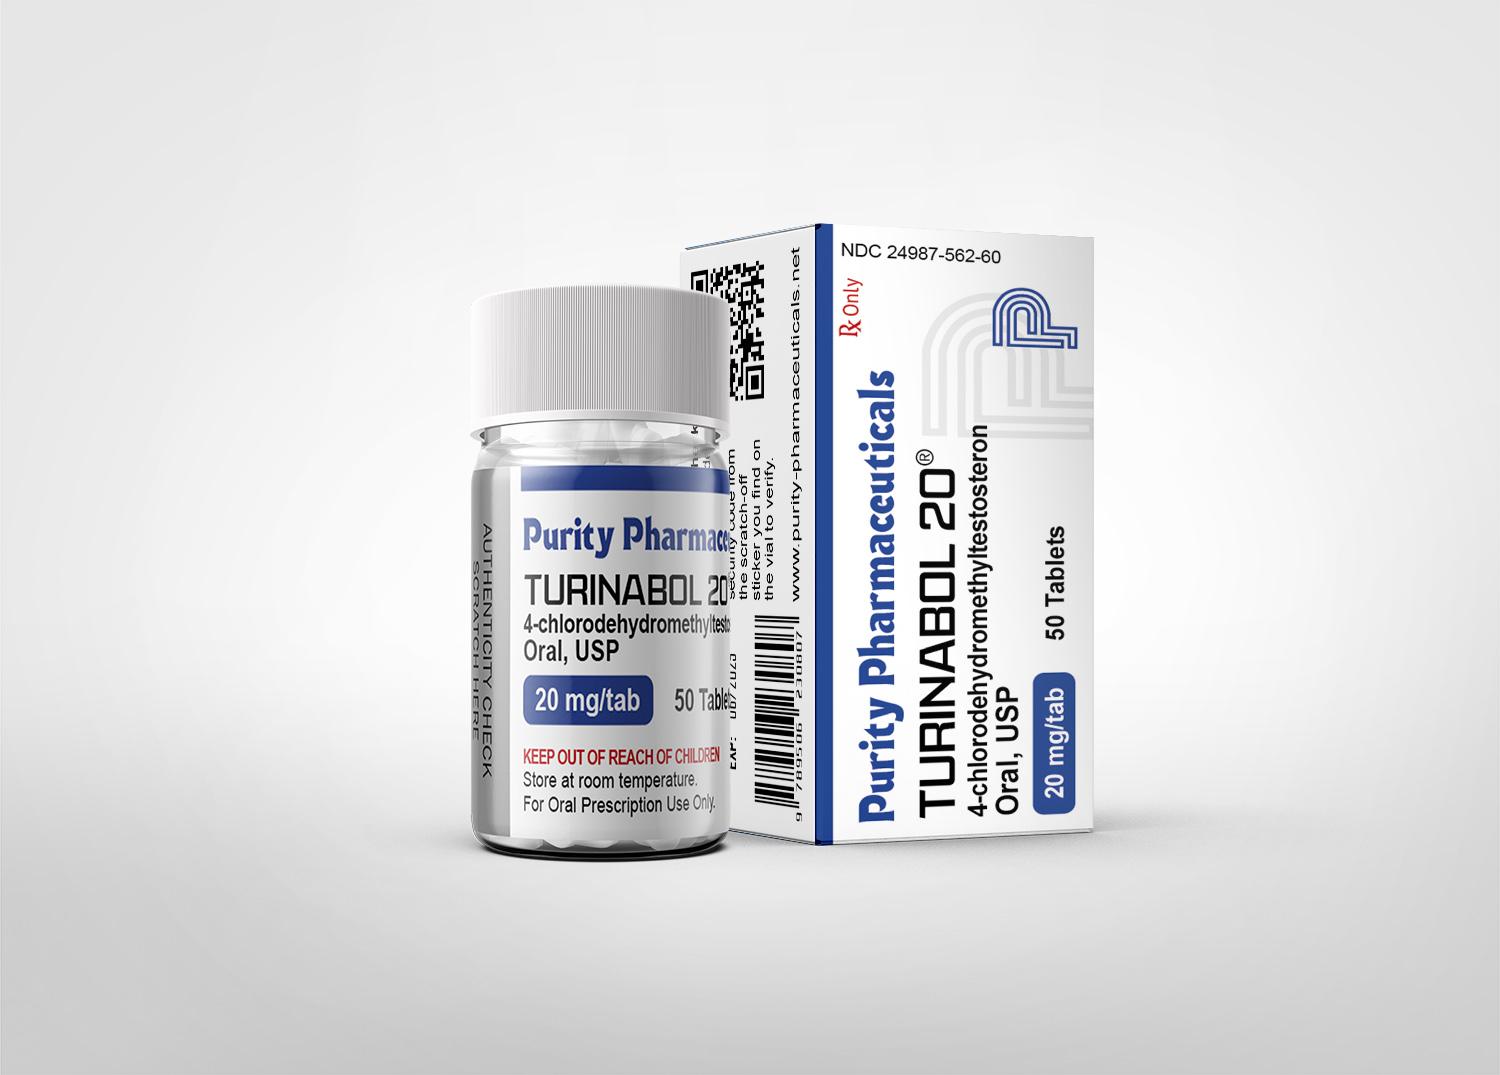 Turinabol 20 kopen by PURITY PHARMACEUTICALS®